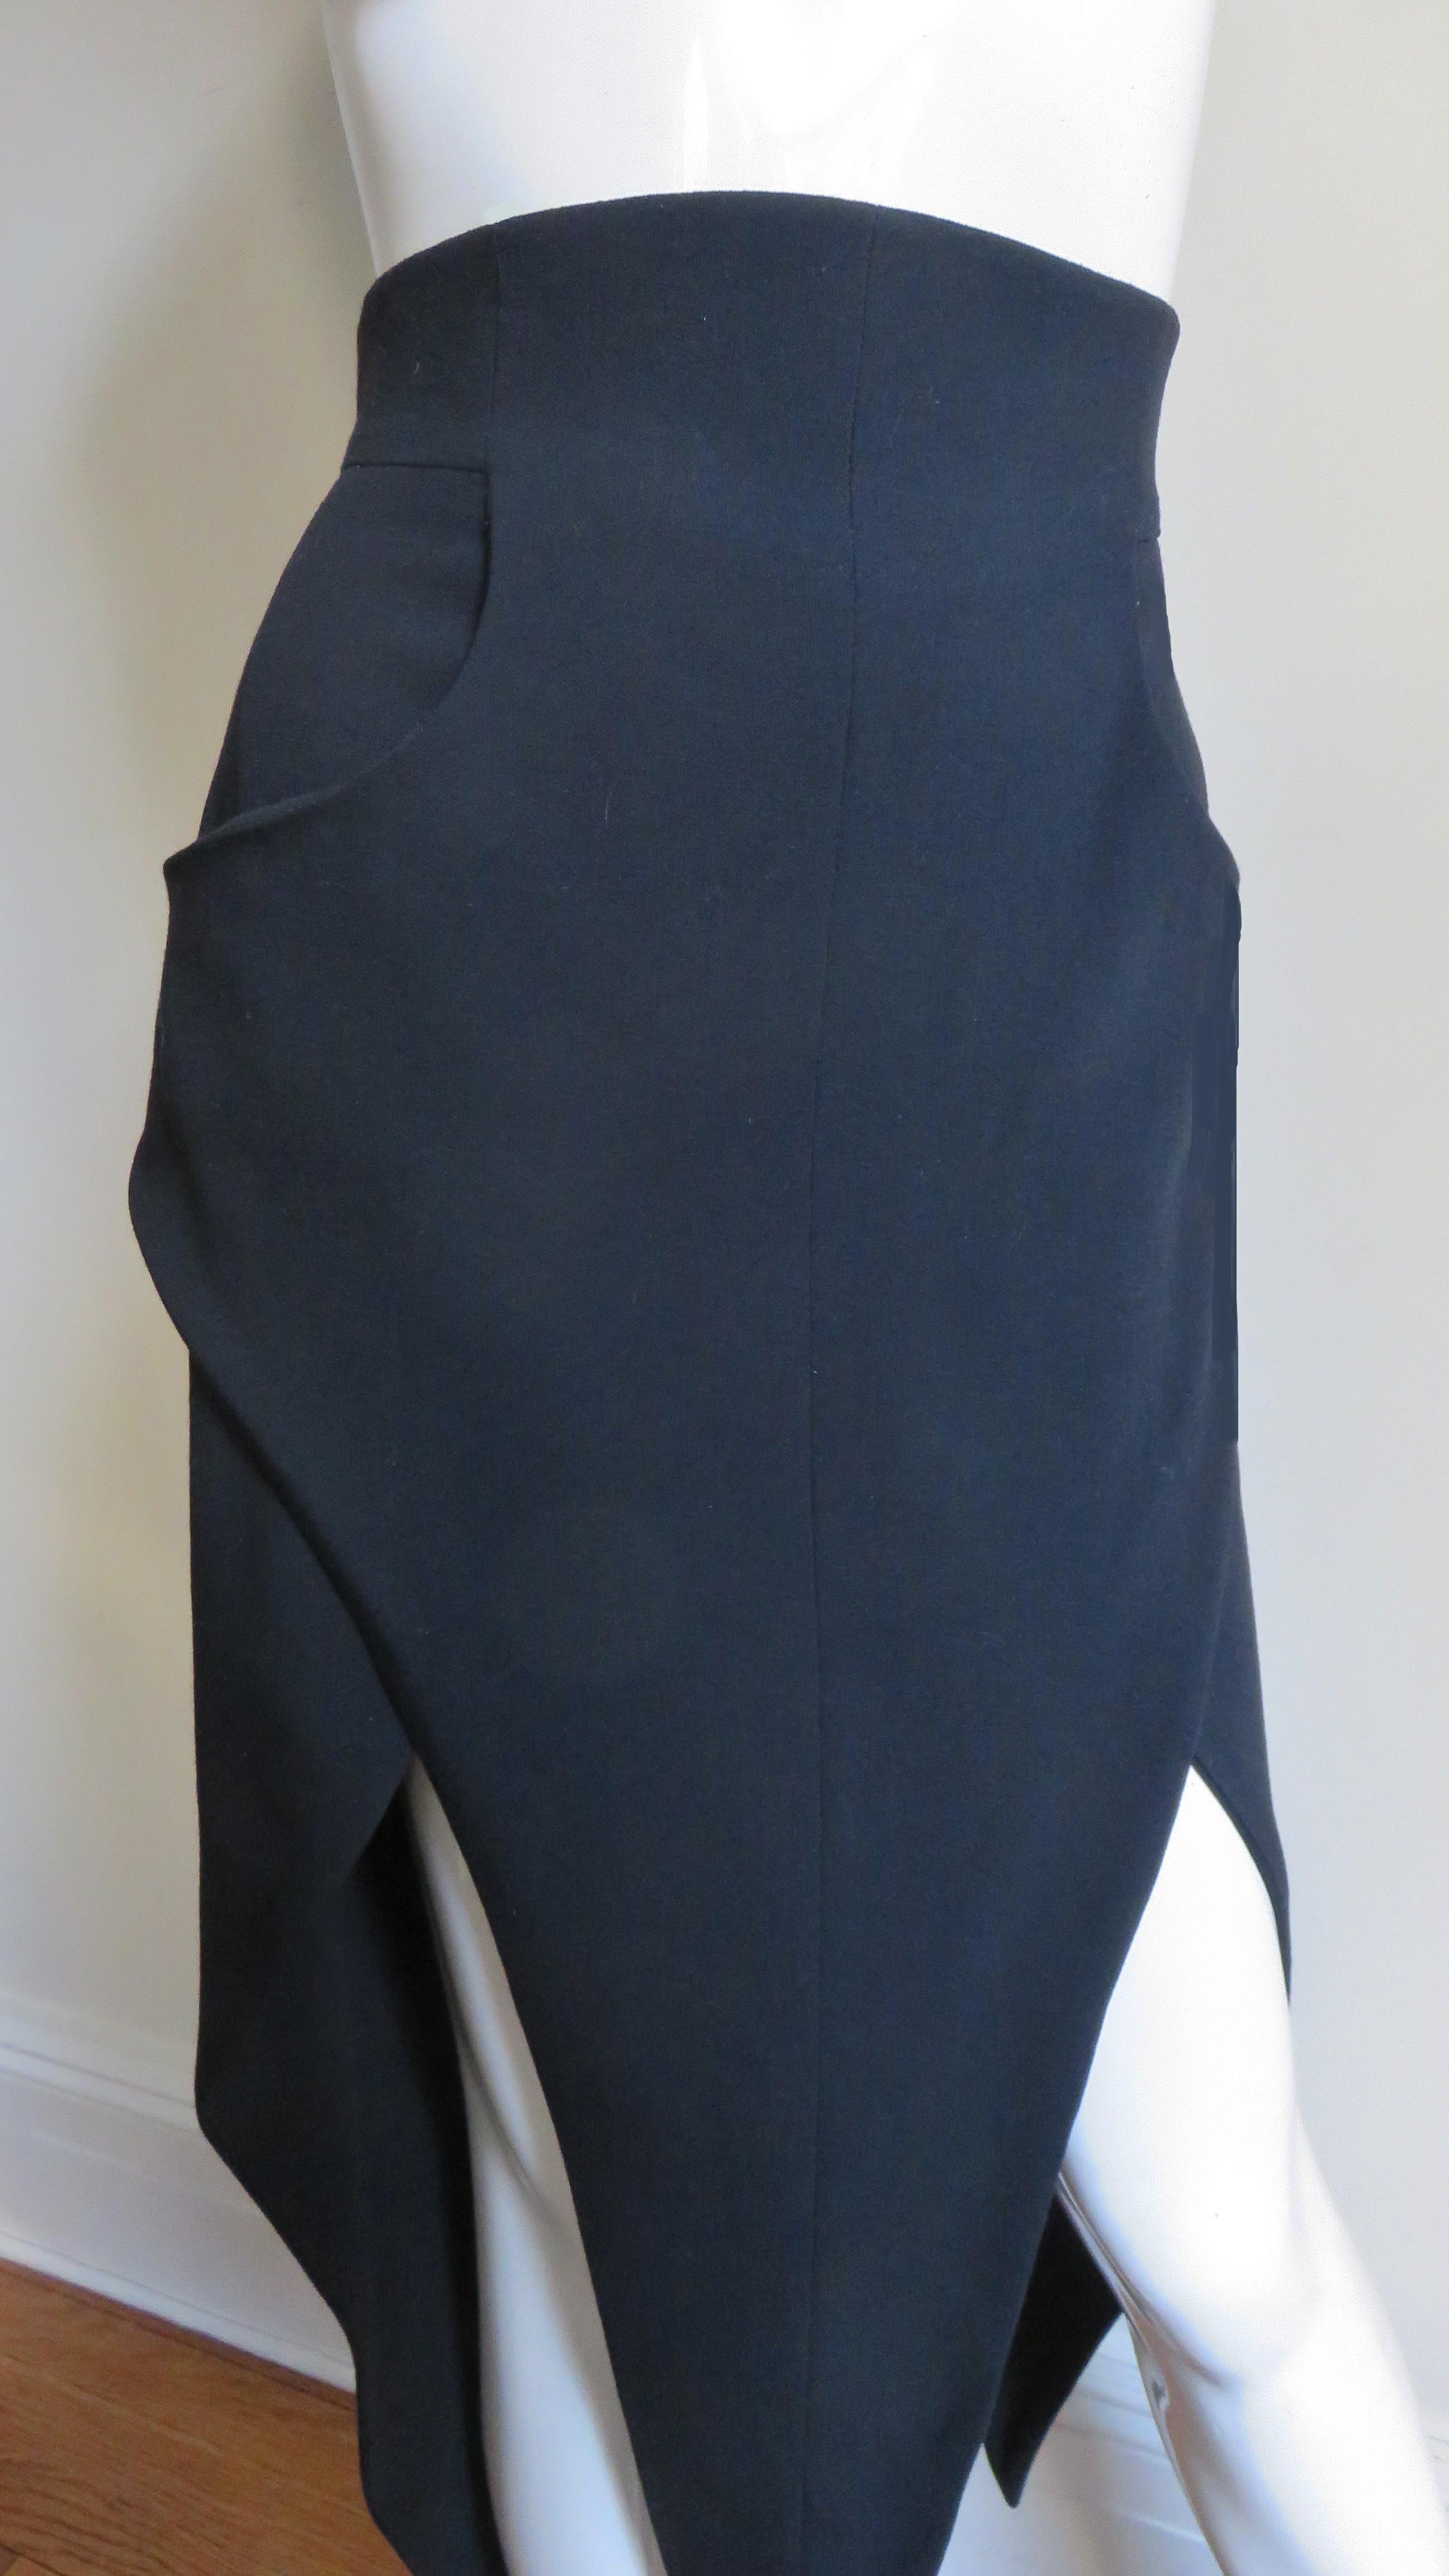 Karl Lagerfeld Skirt with Handkerchief Hem In Excellent Condition For Sale In Water Mill, NY